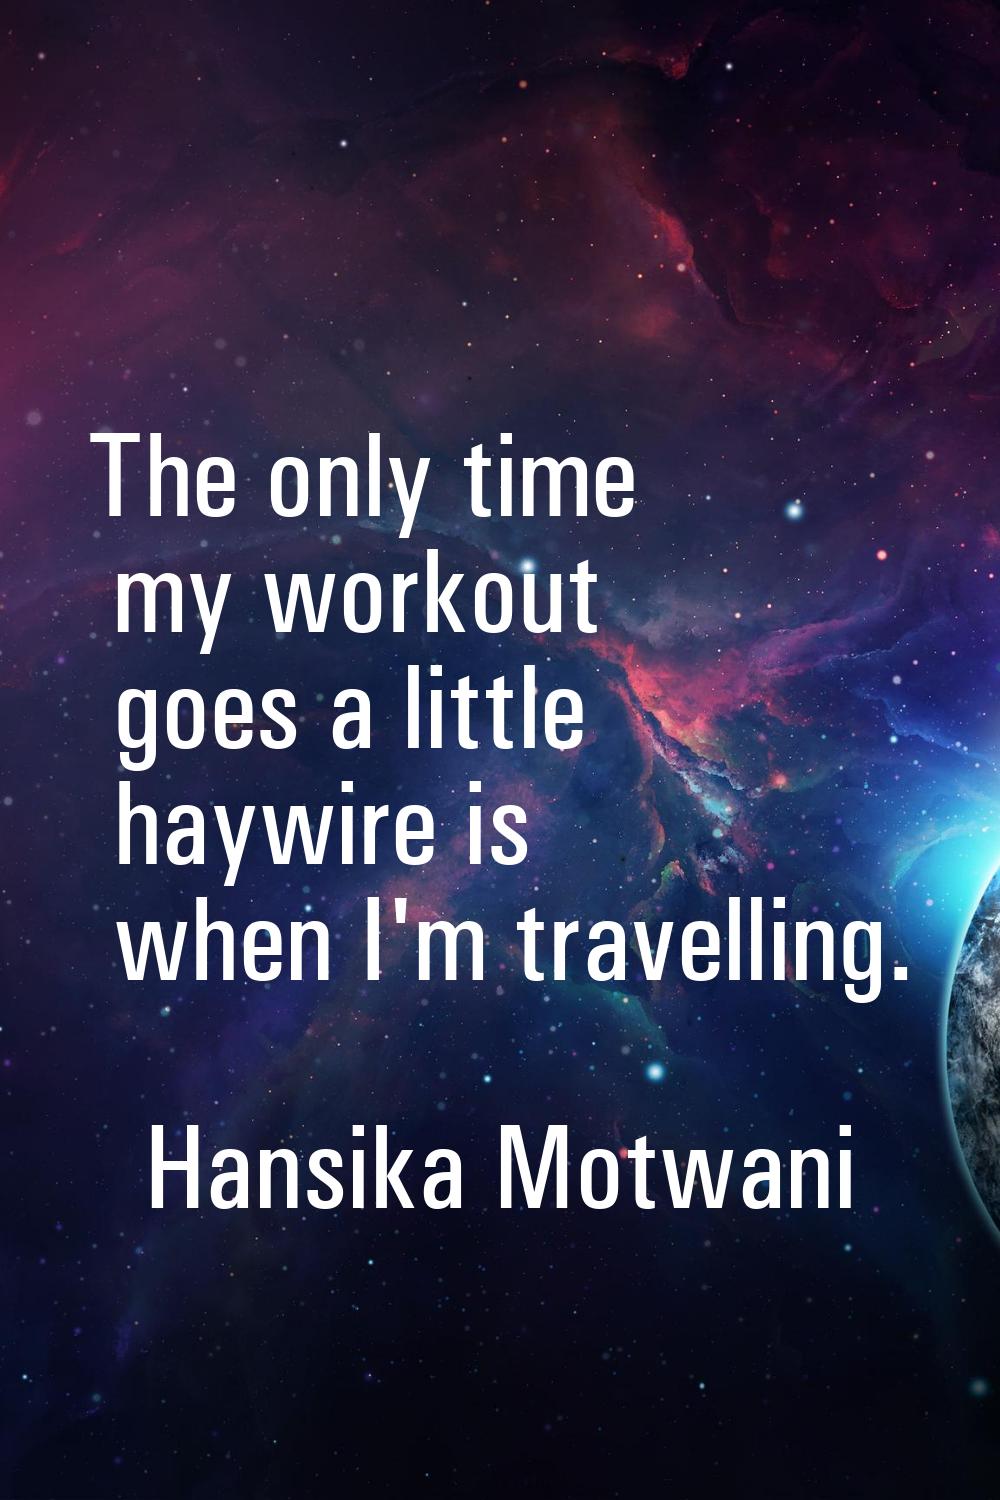 The only time my workout goes a little haywire is when I'm travelling.